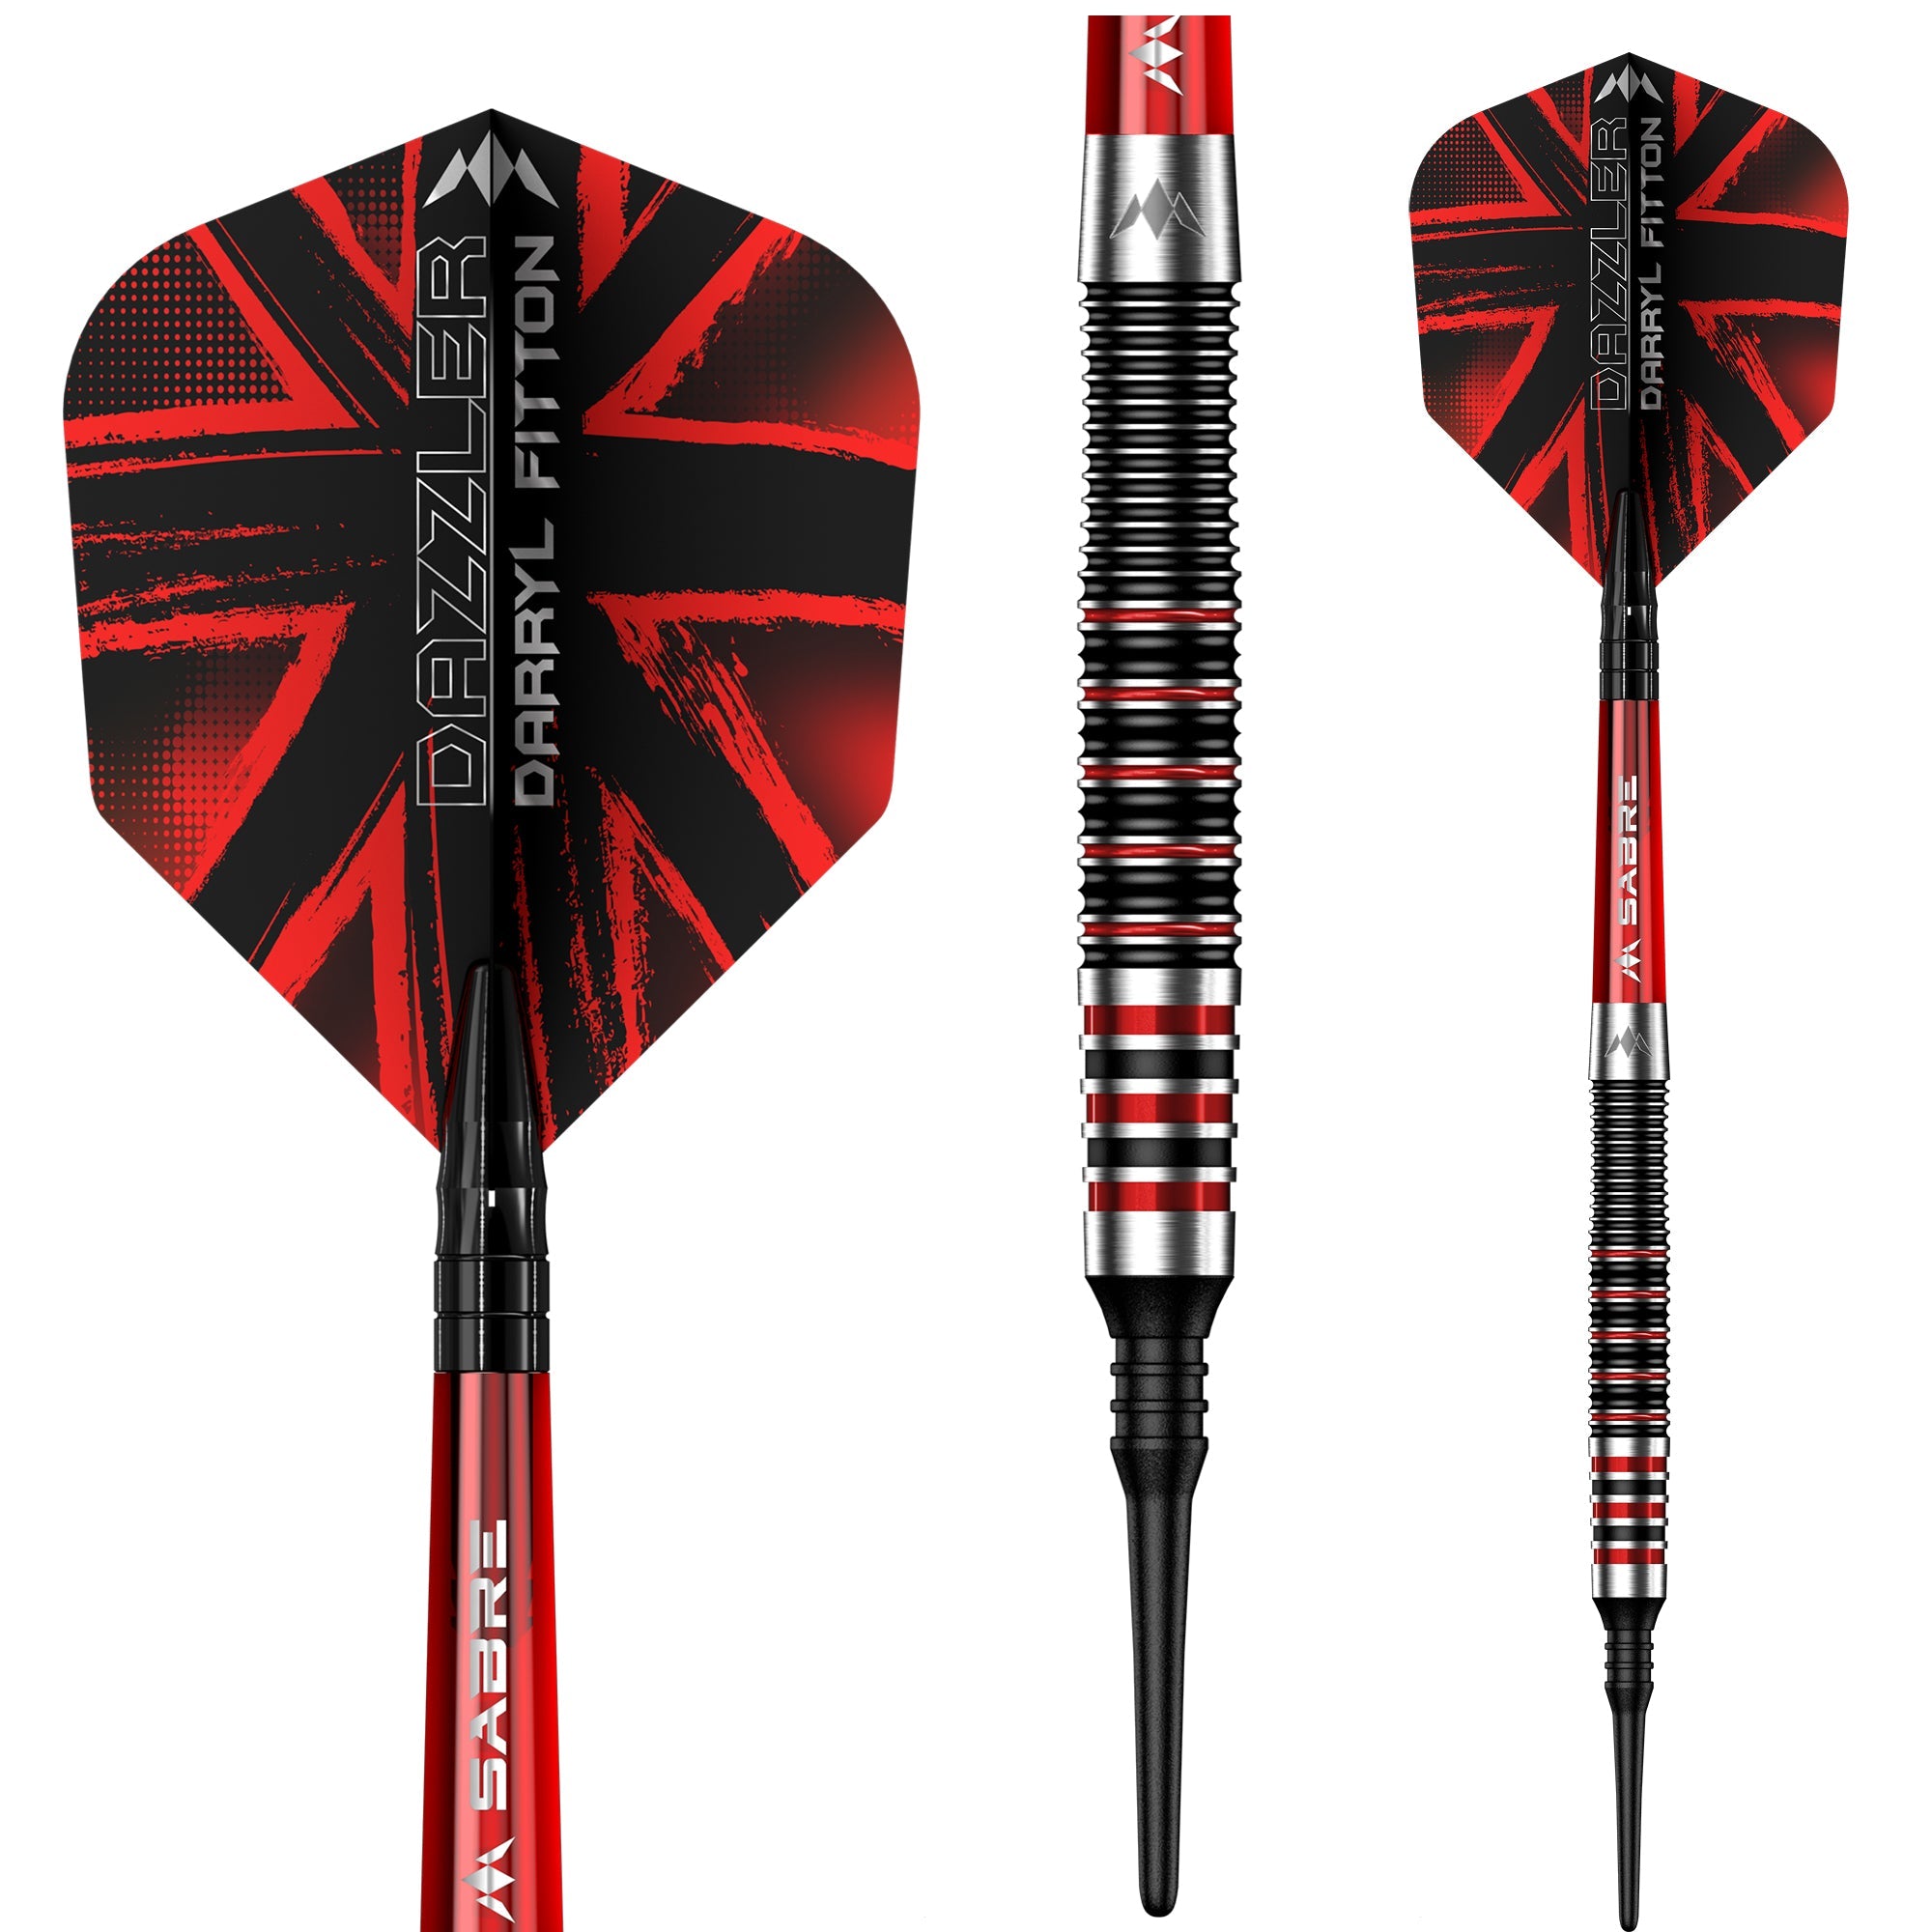 Mission Darryl Fitton Darts - Soft Tip - Electro Black & Red - The Dazzler - 18g